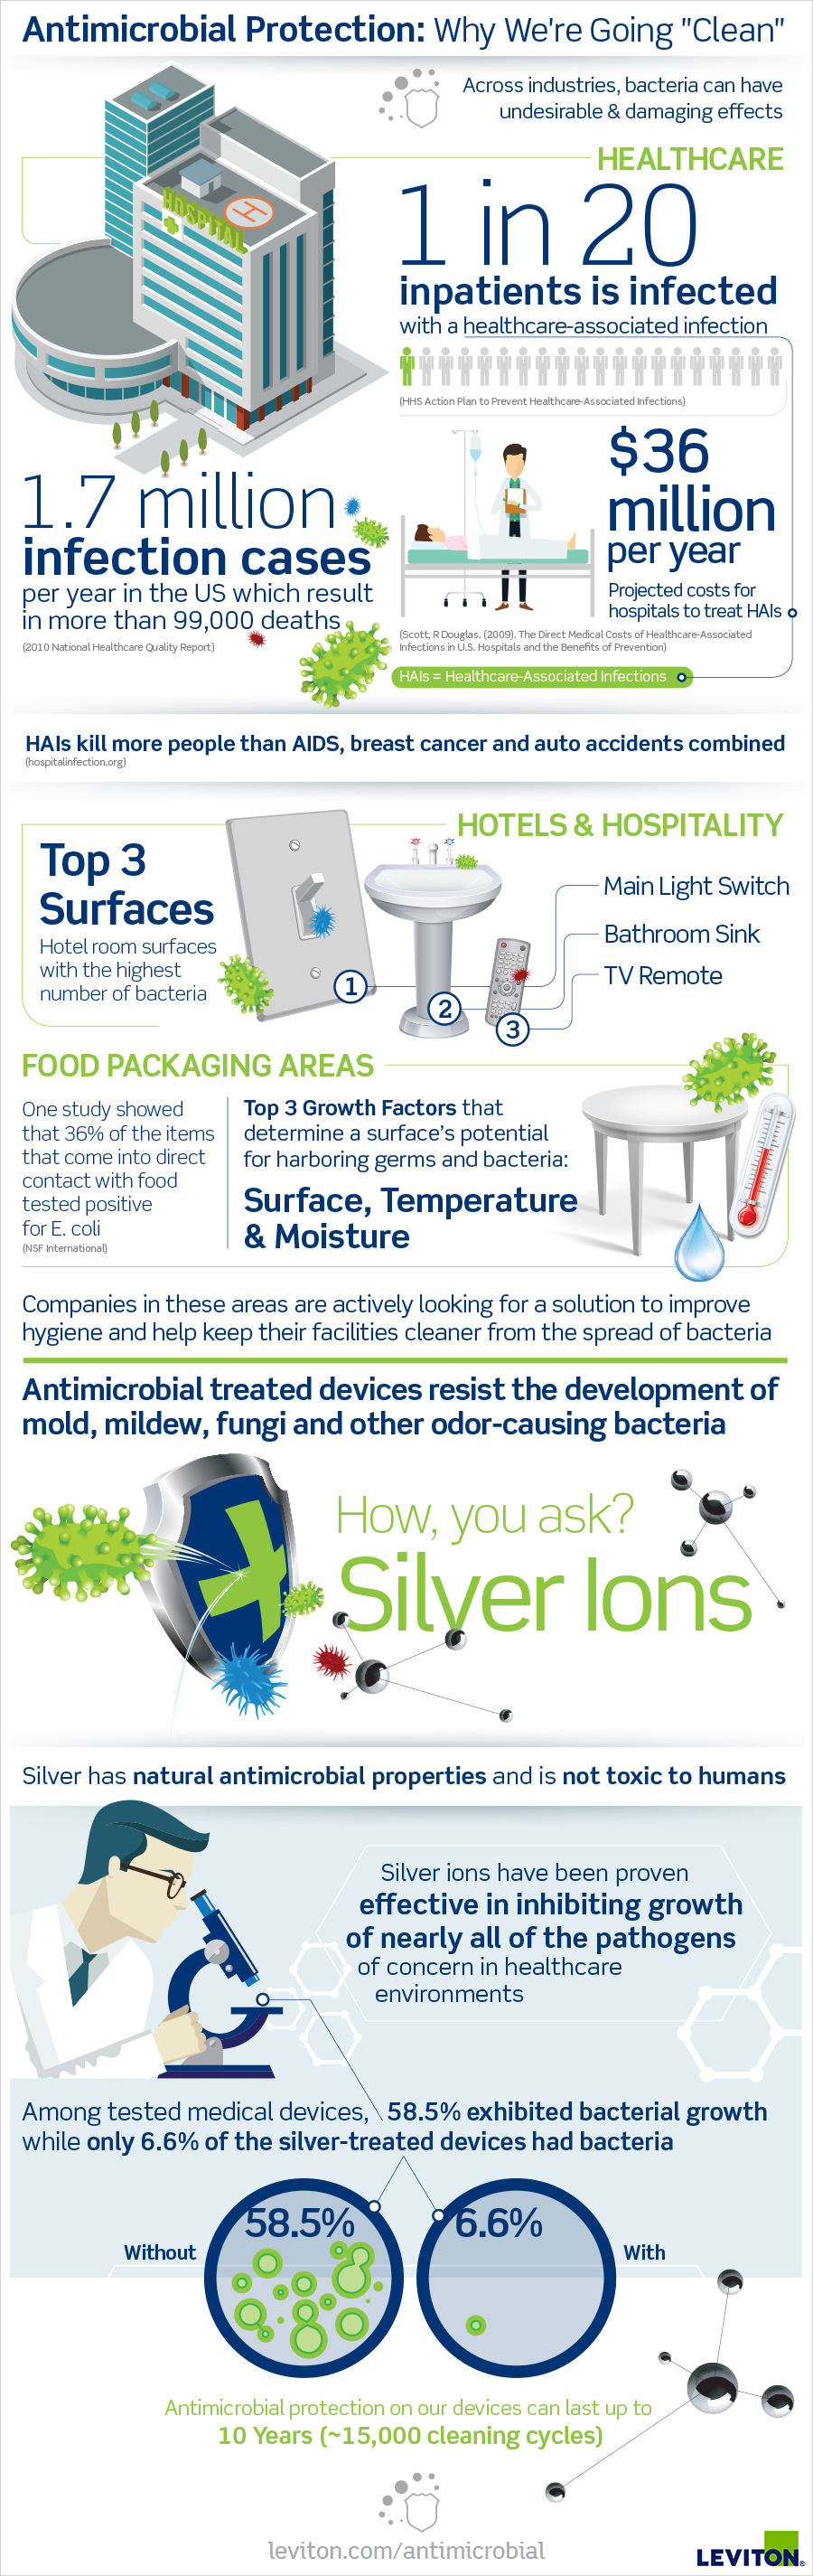 Antimicrobial Protection Infographic